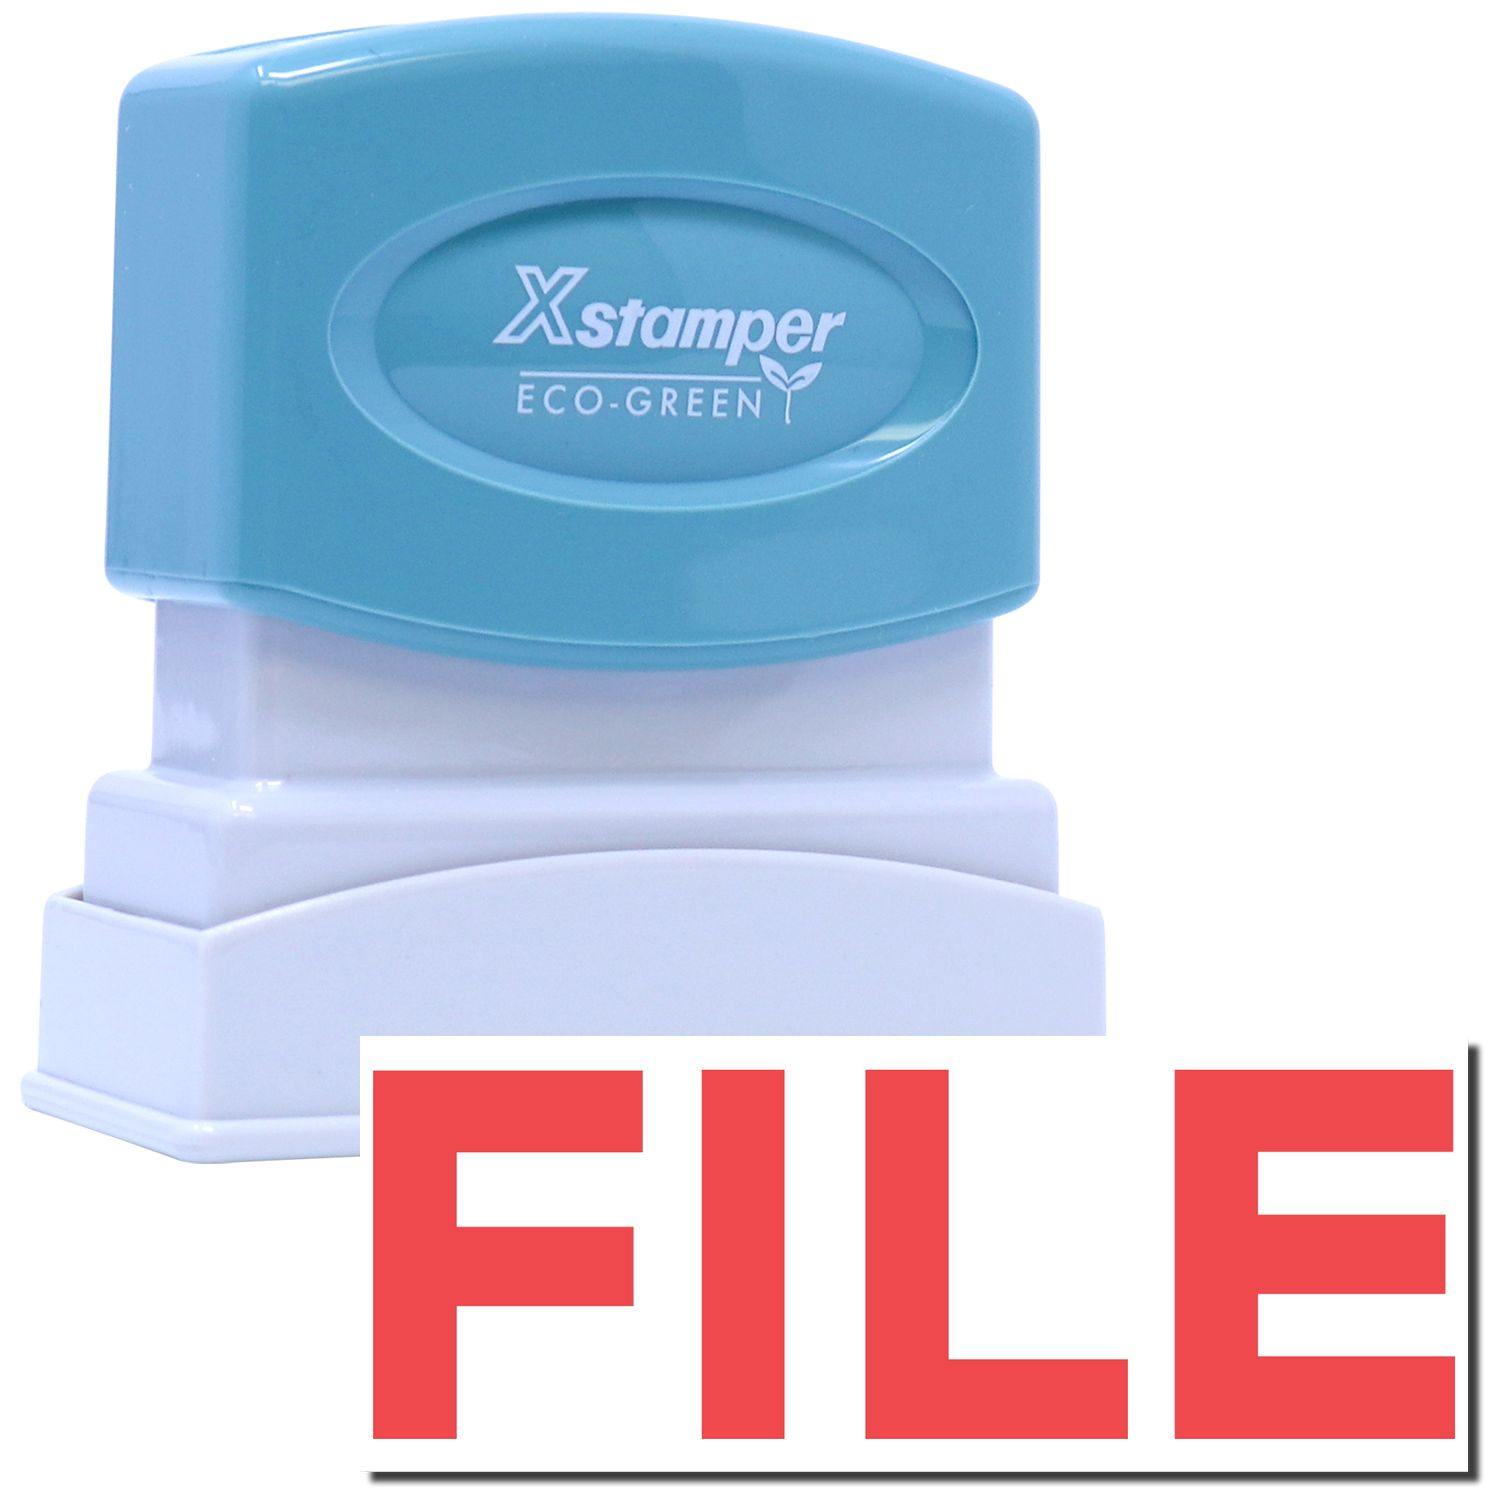 An xstamper stamp with a stamped image showing how the text "FILE" in red color is displayed after stamping.